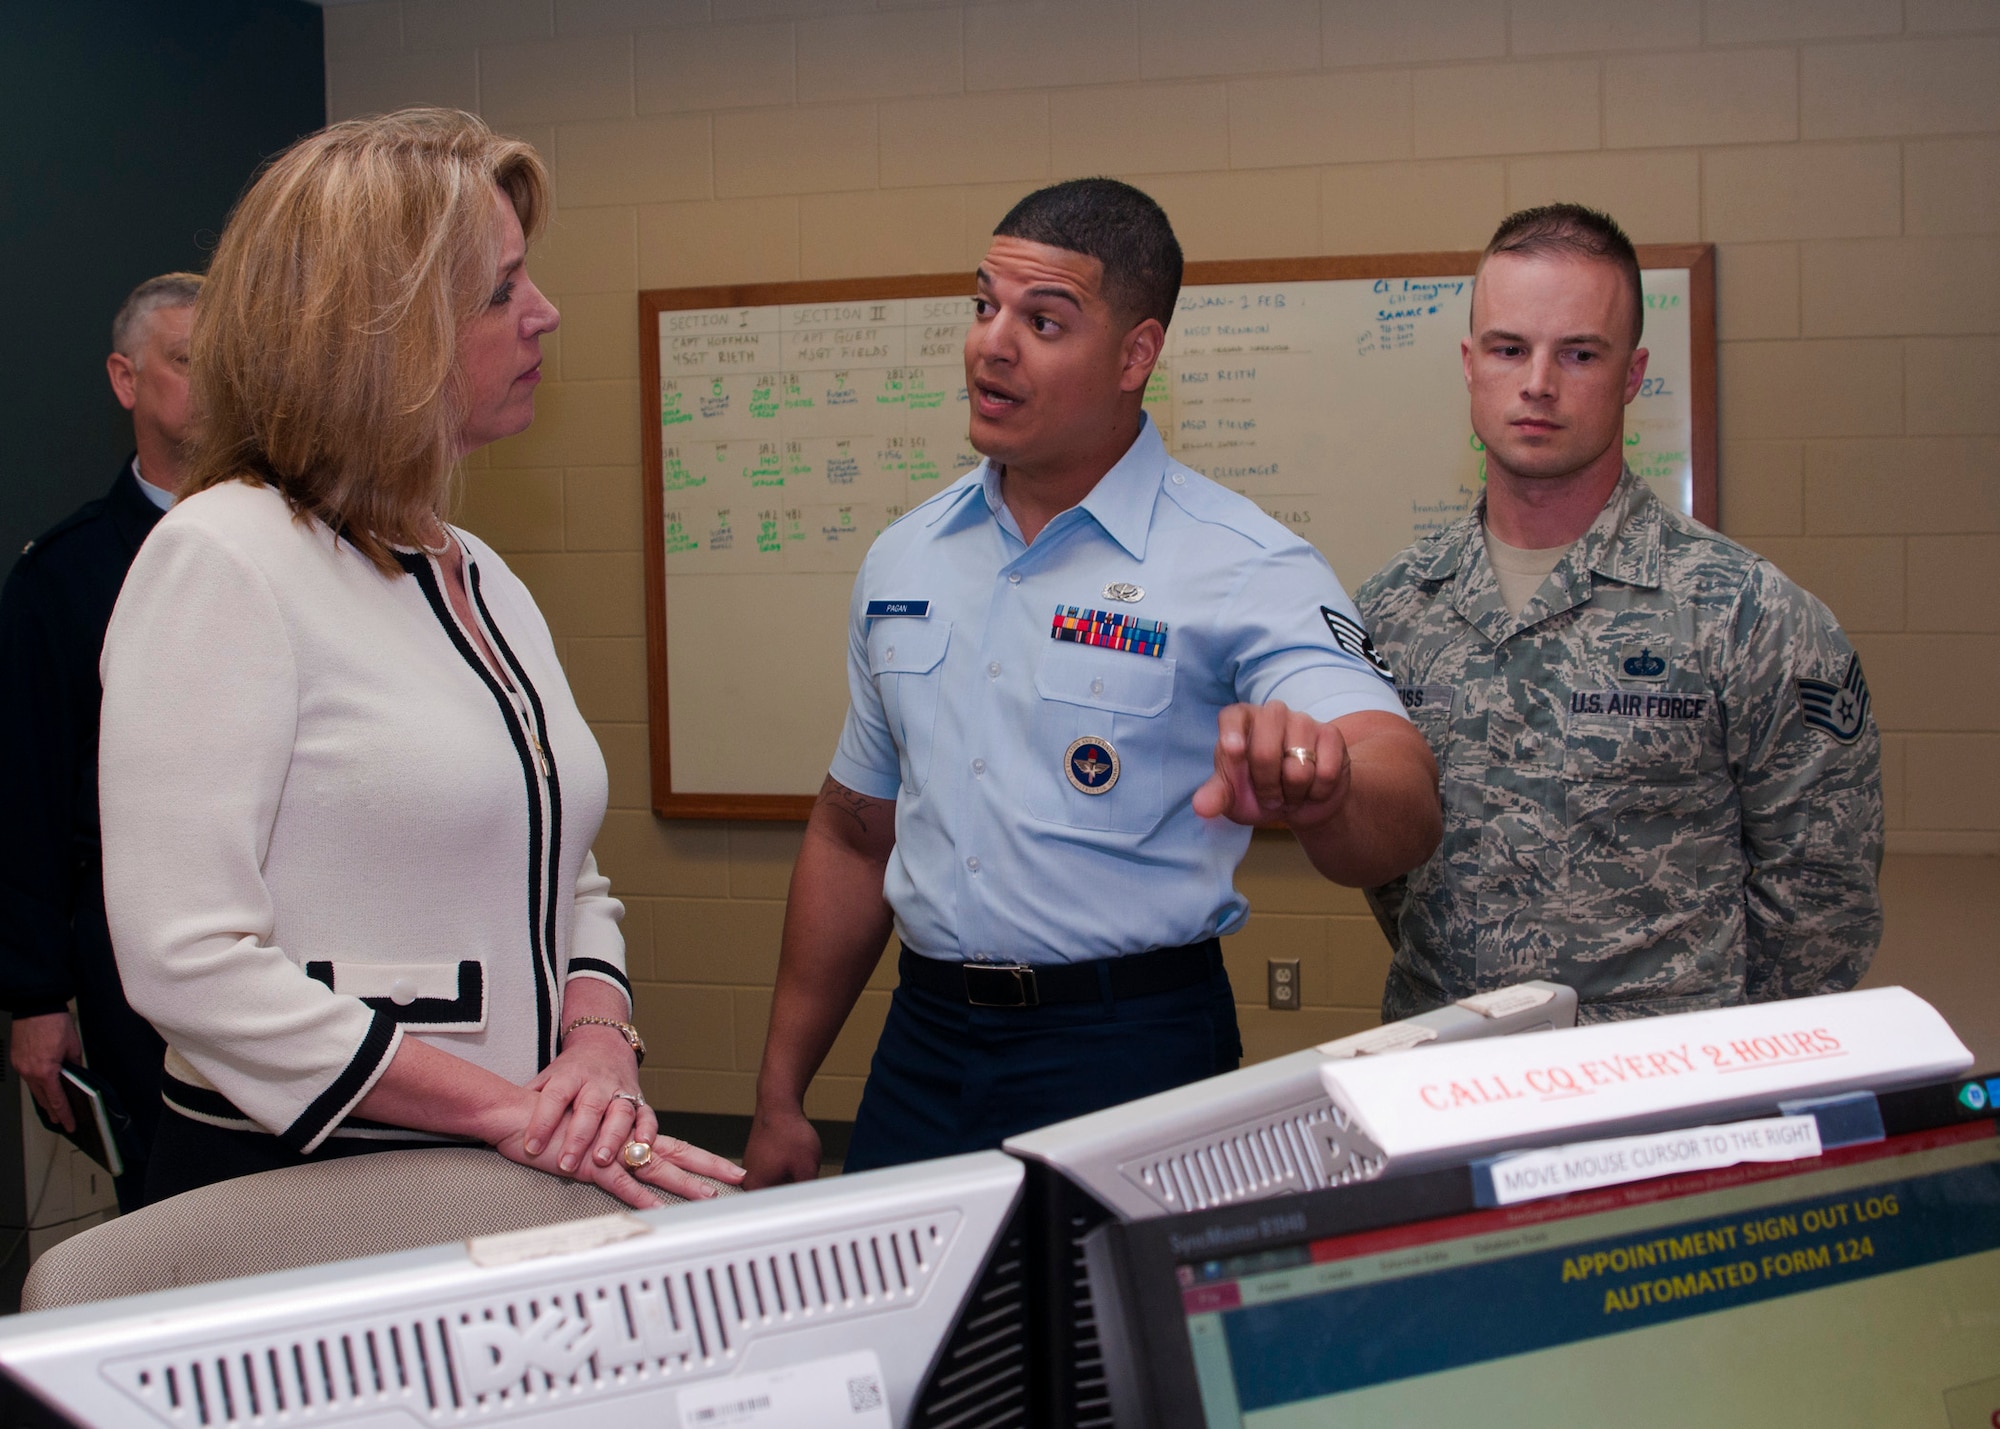 Secretary of the Air Force Deborah Lee James is briefed on the command of quarters procedures by Tech. Sgt. Christian Pagan-Guzman and Staff Sgt. Dennis Weiss, both military training instructors with the 323rd Training Squadron, during a tour of the 323rd Training Squadron facilities Jan. 31 at Joint Base San Antonio-Lackland, Texas. The SecAF made her first visit to Joint Base San Antonio Jan. 30-31 where she received a mission brief of the 37th Training Wing, discussed the way ahead with installation leadership and held an all call with Air Education and Training personnel at JBSA-Randolph. (U.S. Air Force photo by Staff Sgt. Marissa Tucker)